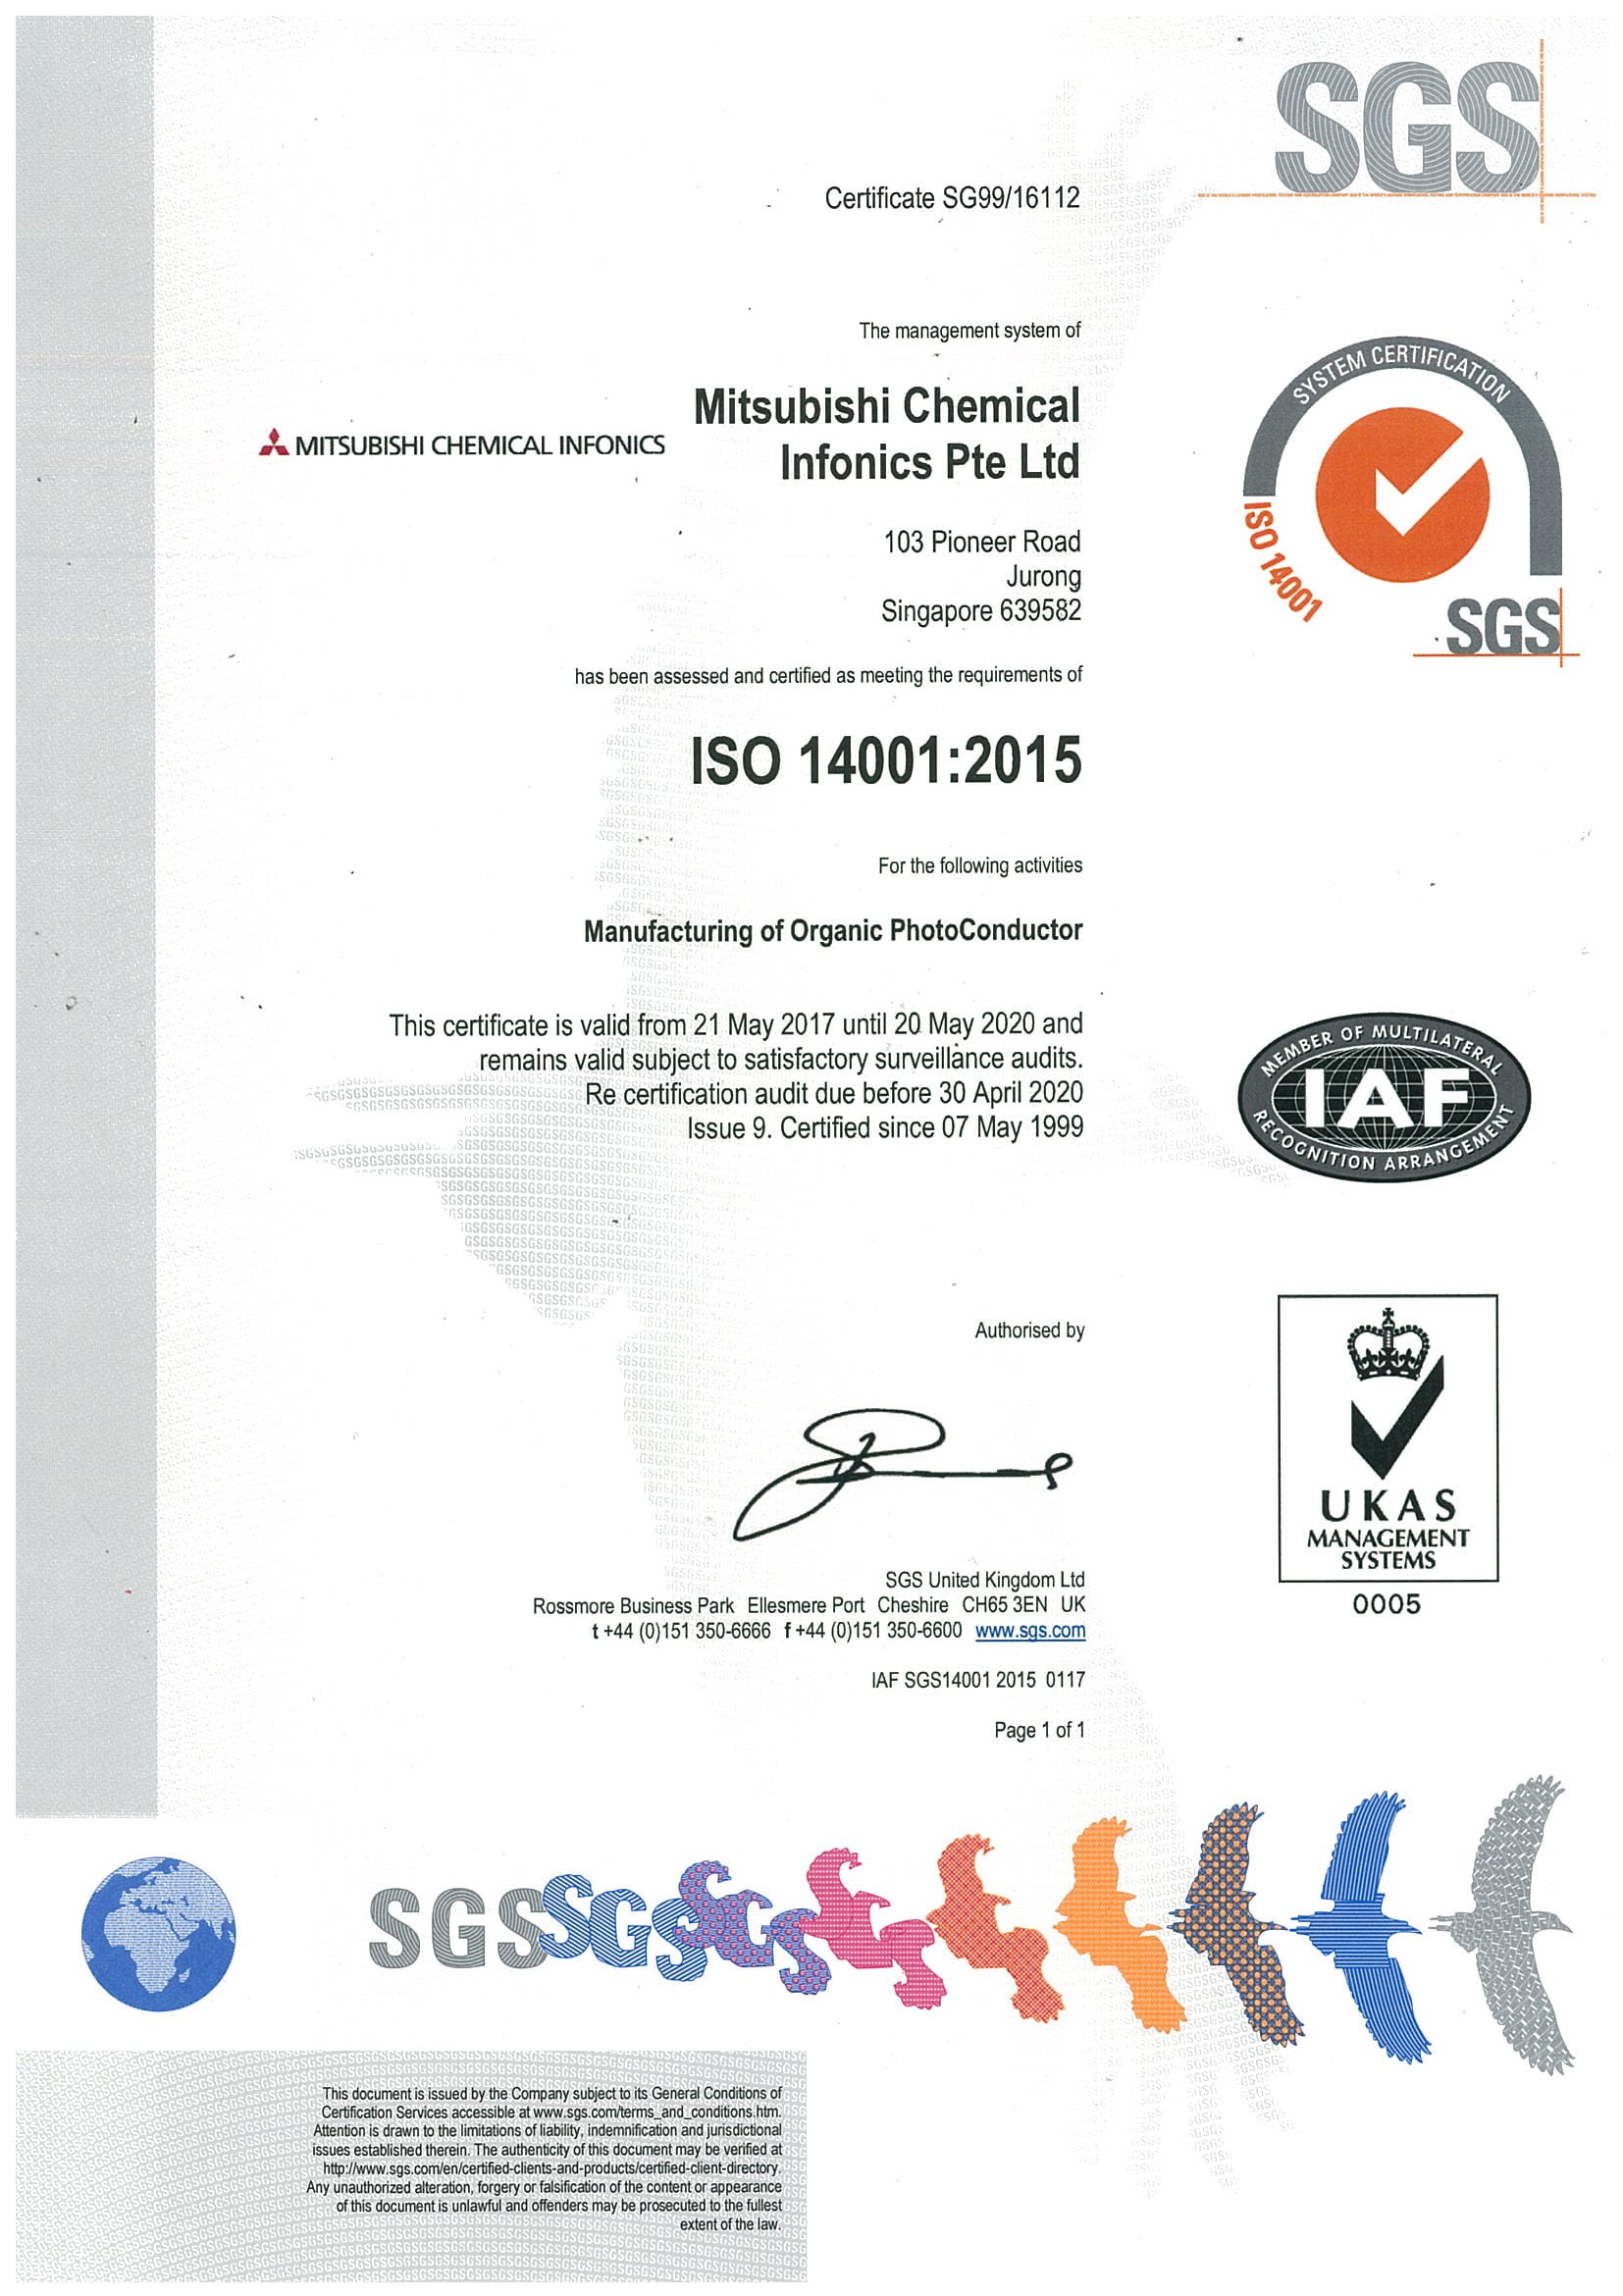 MCI_ISO 14001-2015 Certificate_expried 20 May 2020-1.jpg